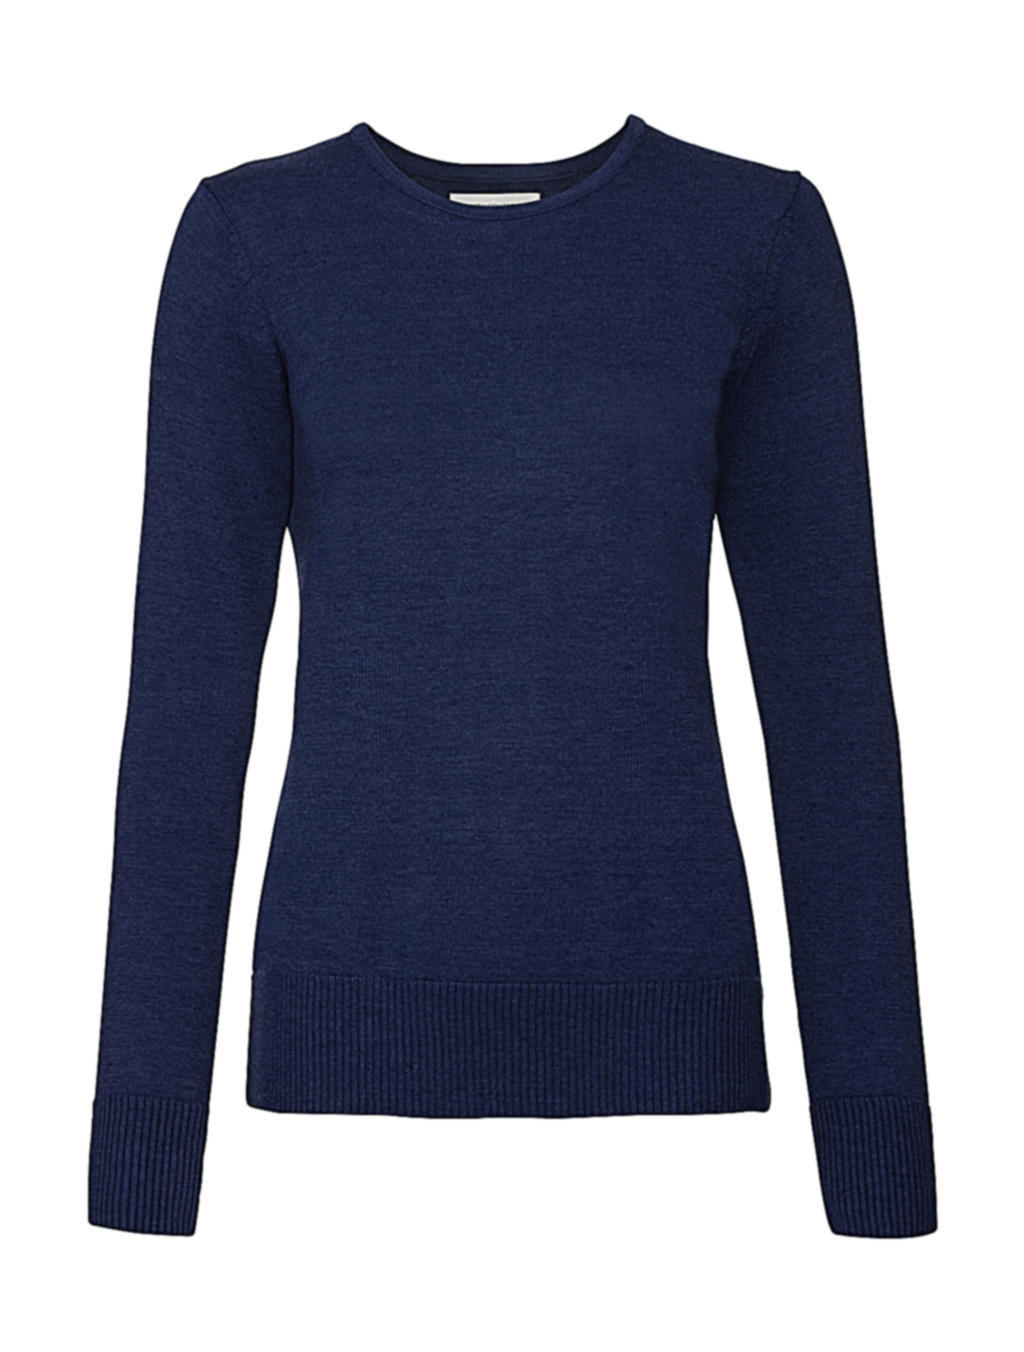  Ladies Crew Neck Knitted Pullover in Farbe Denim Marl